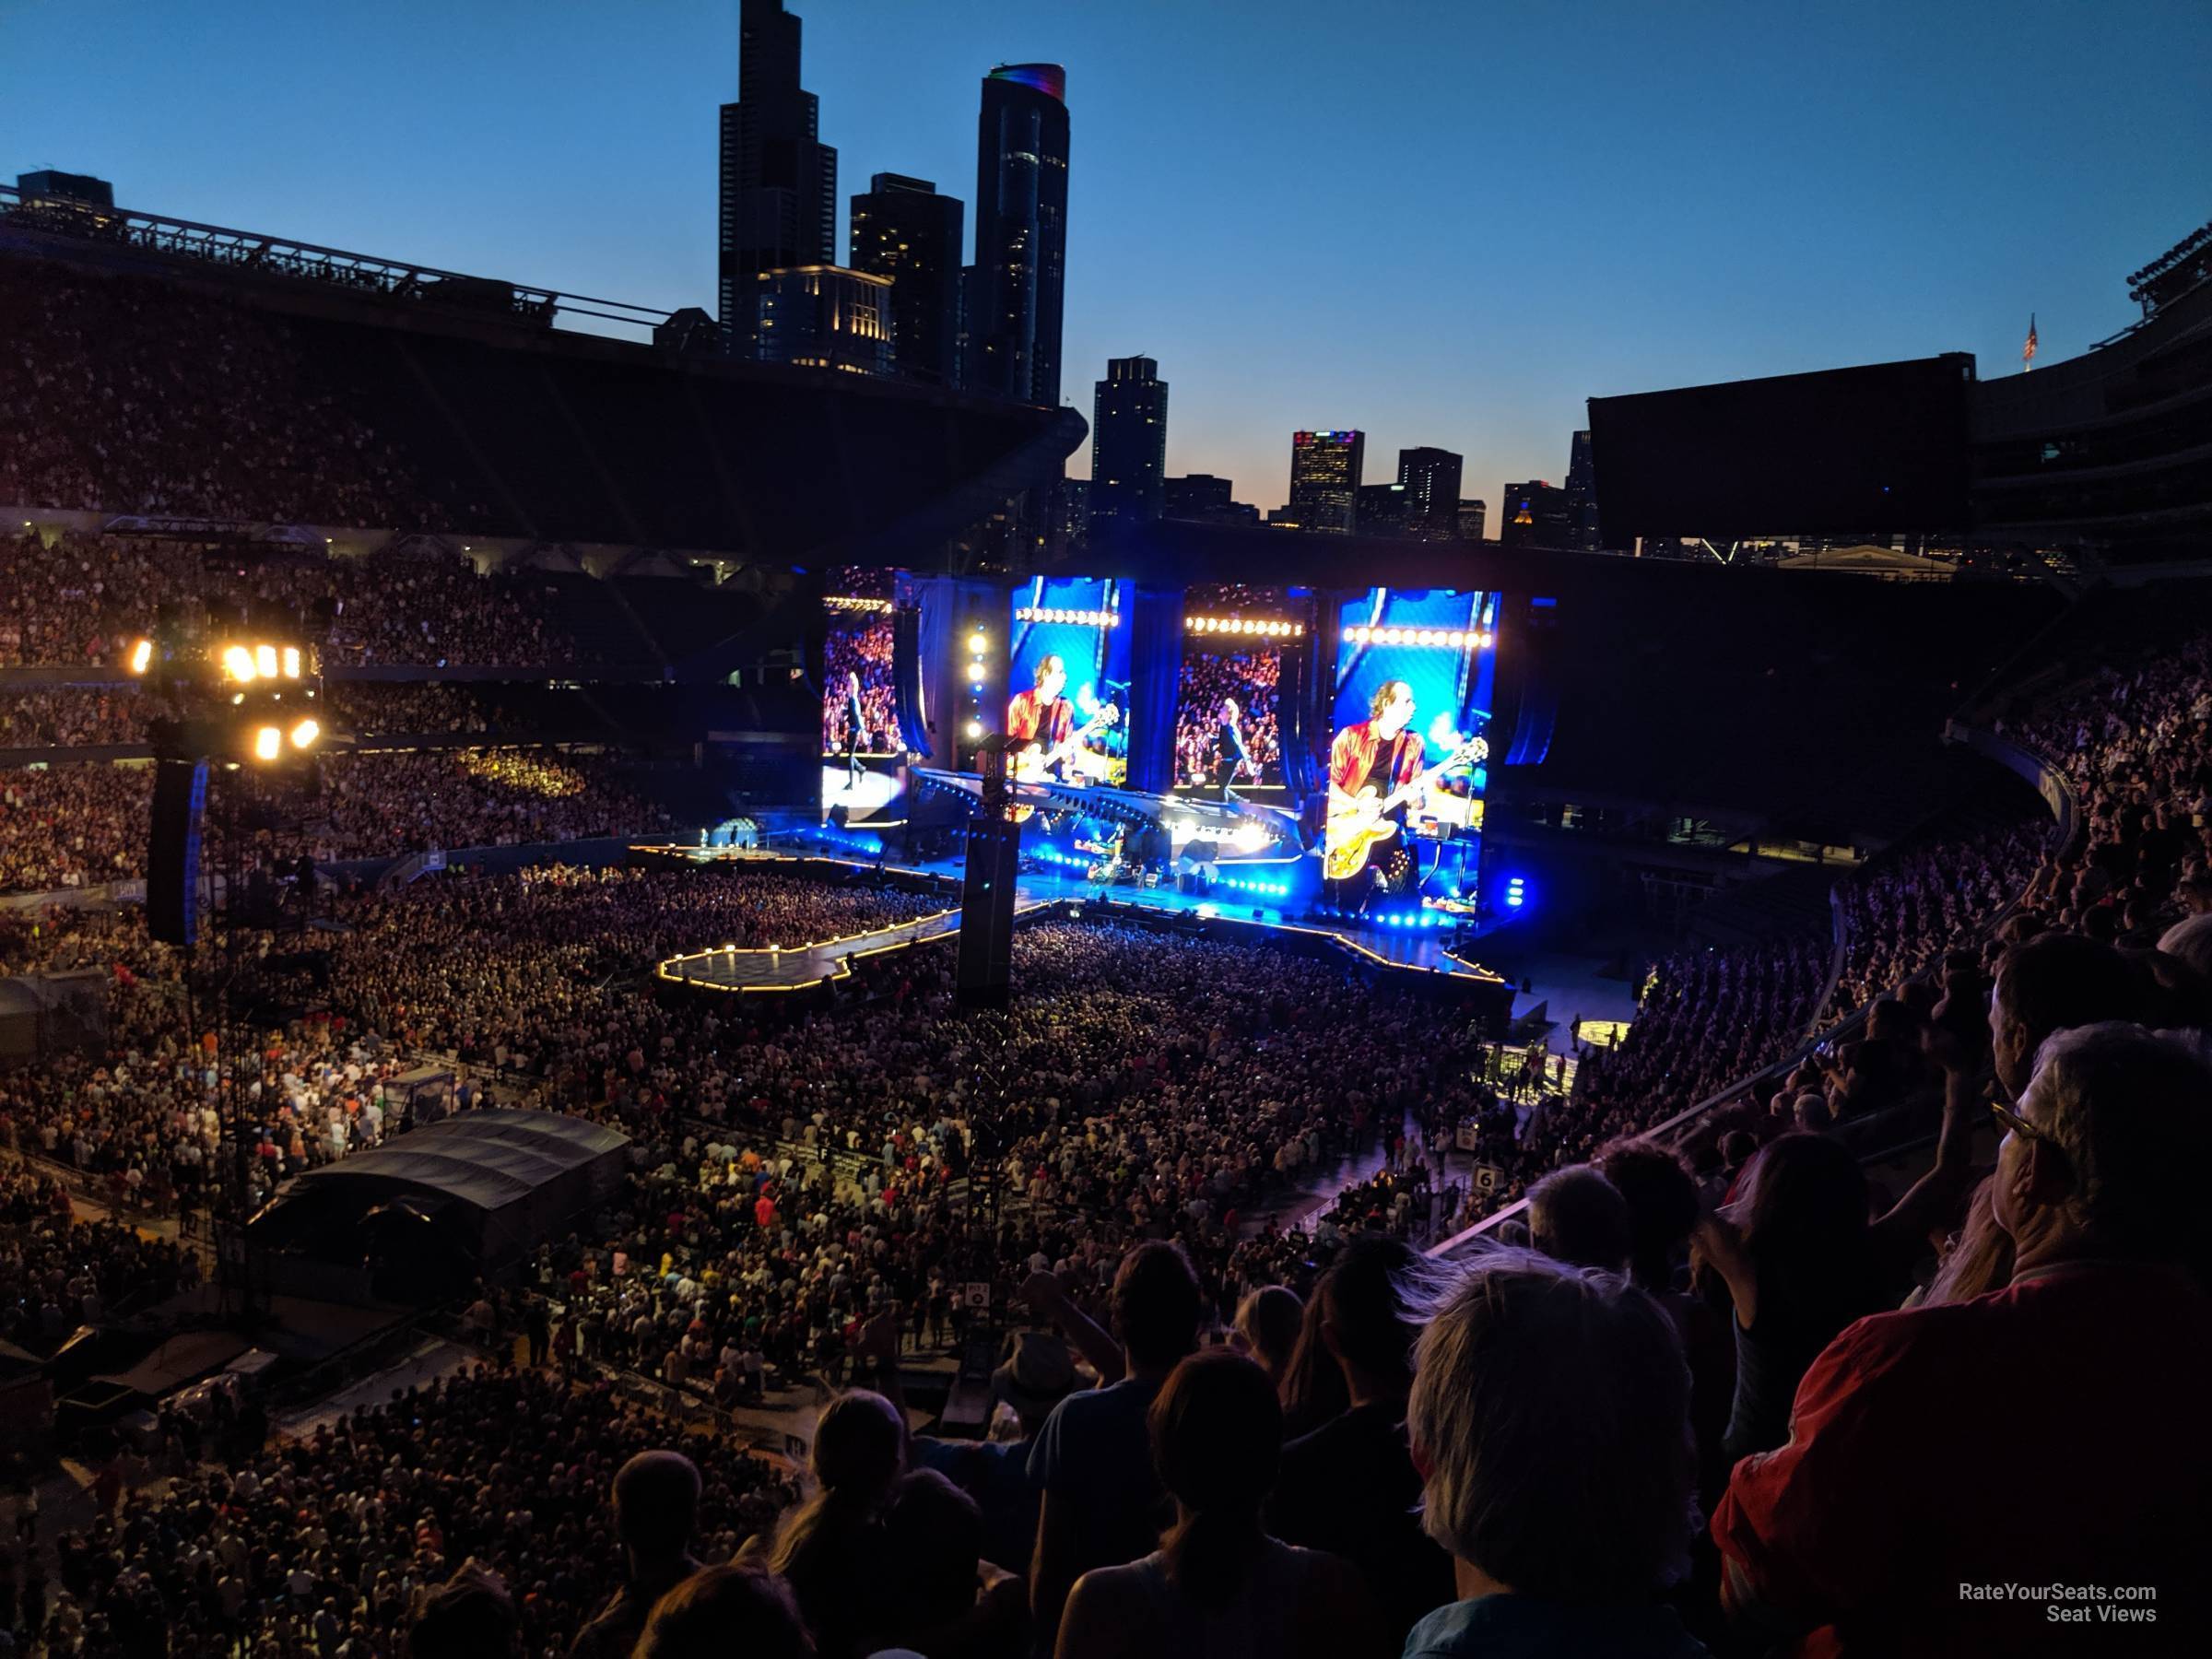 section 313, row 12 seat view  for concert - soldier field